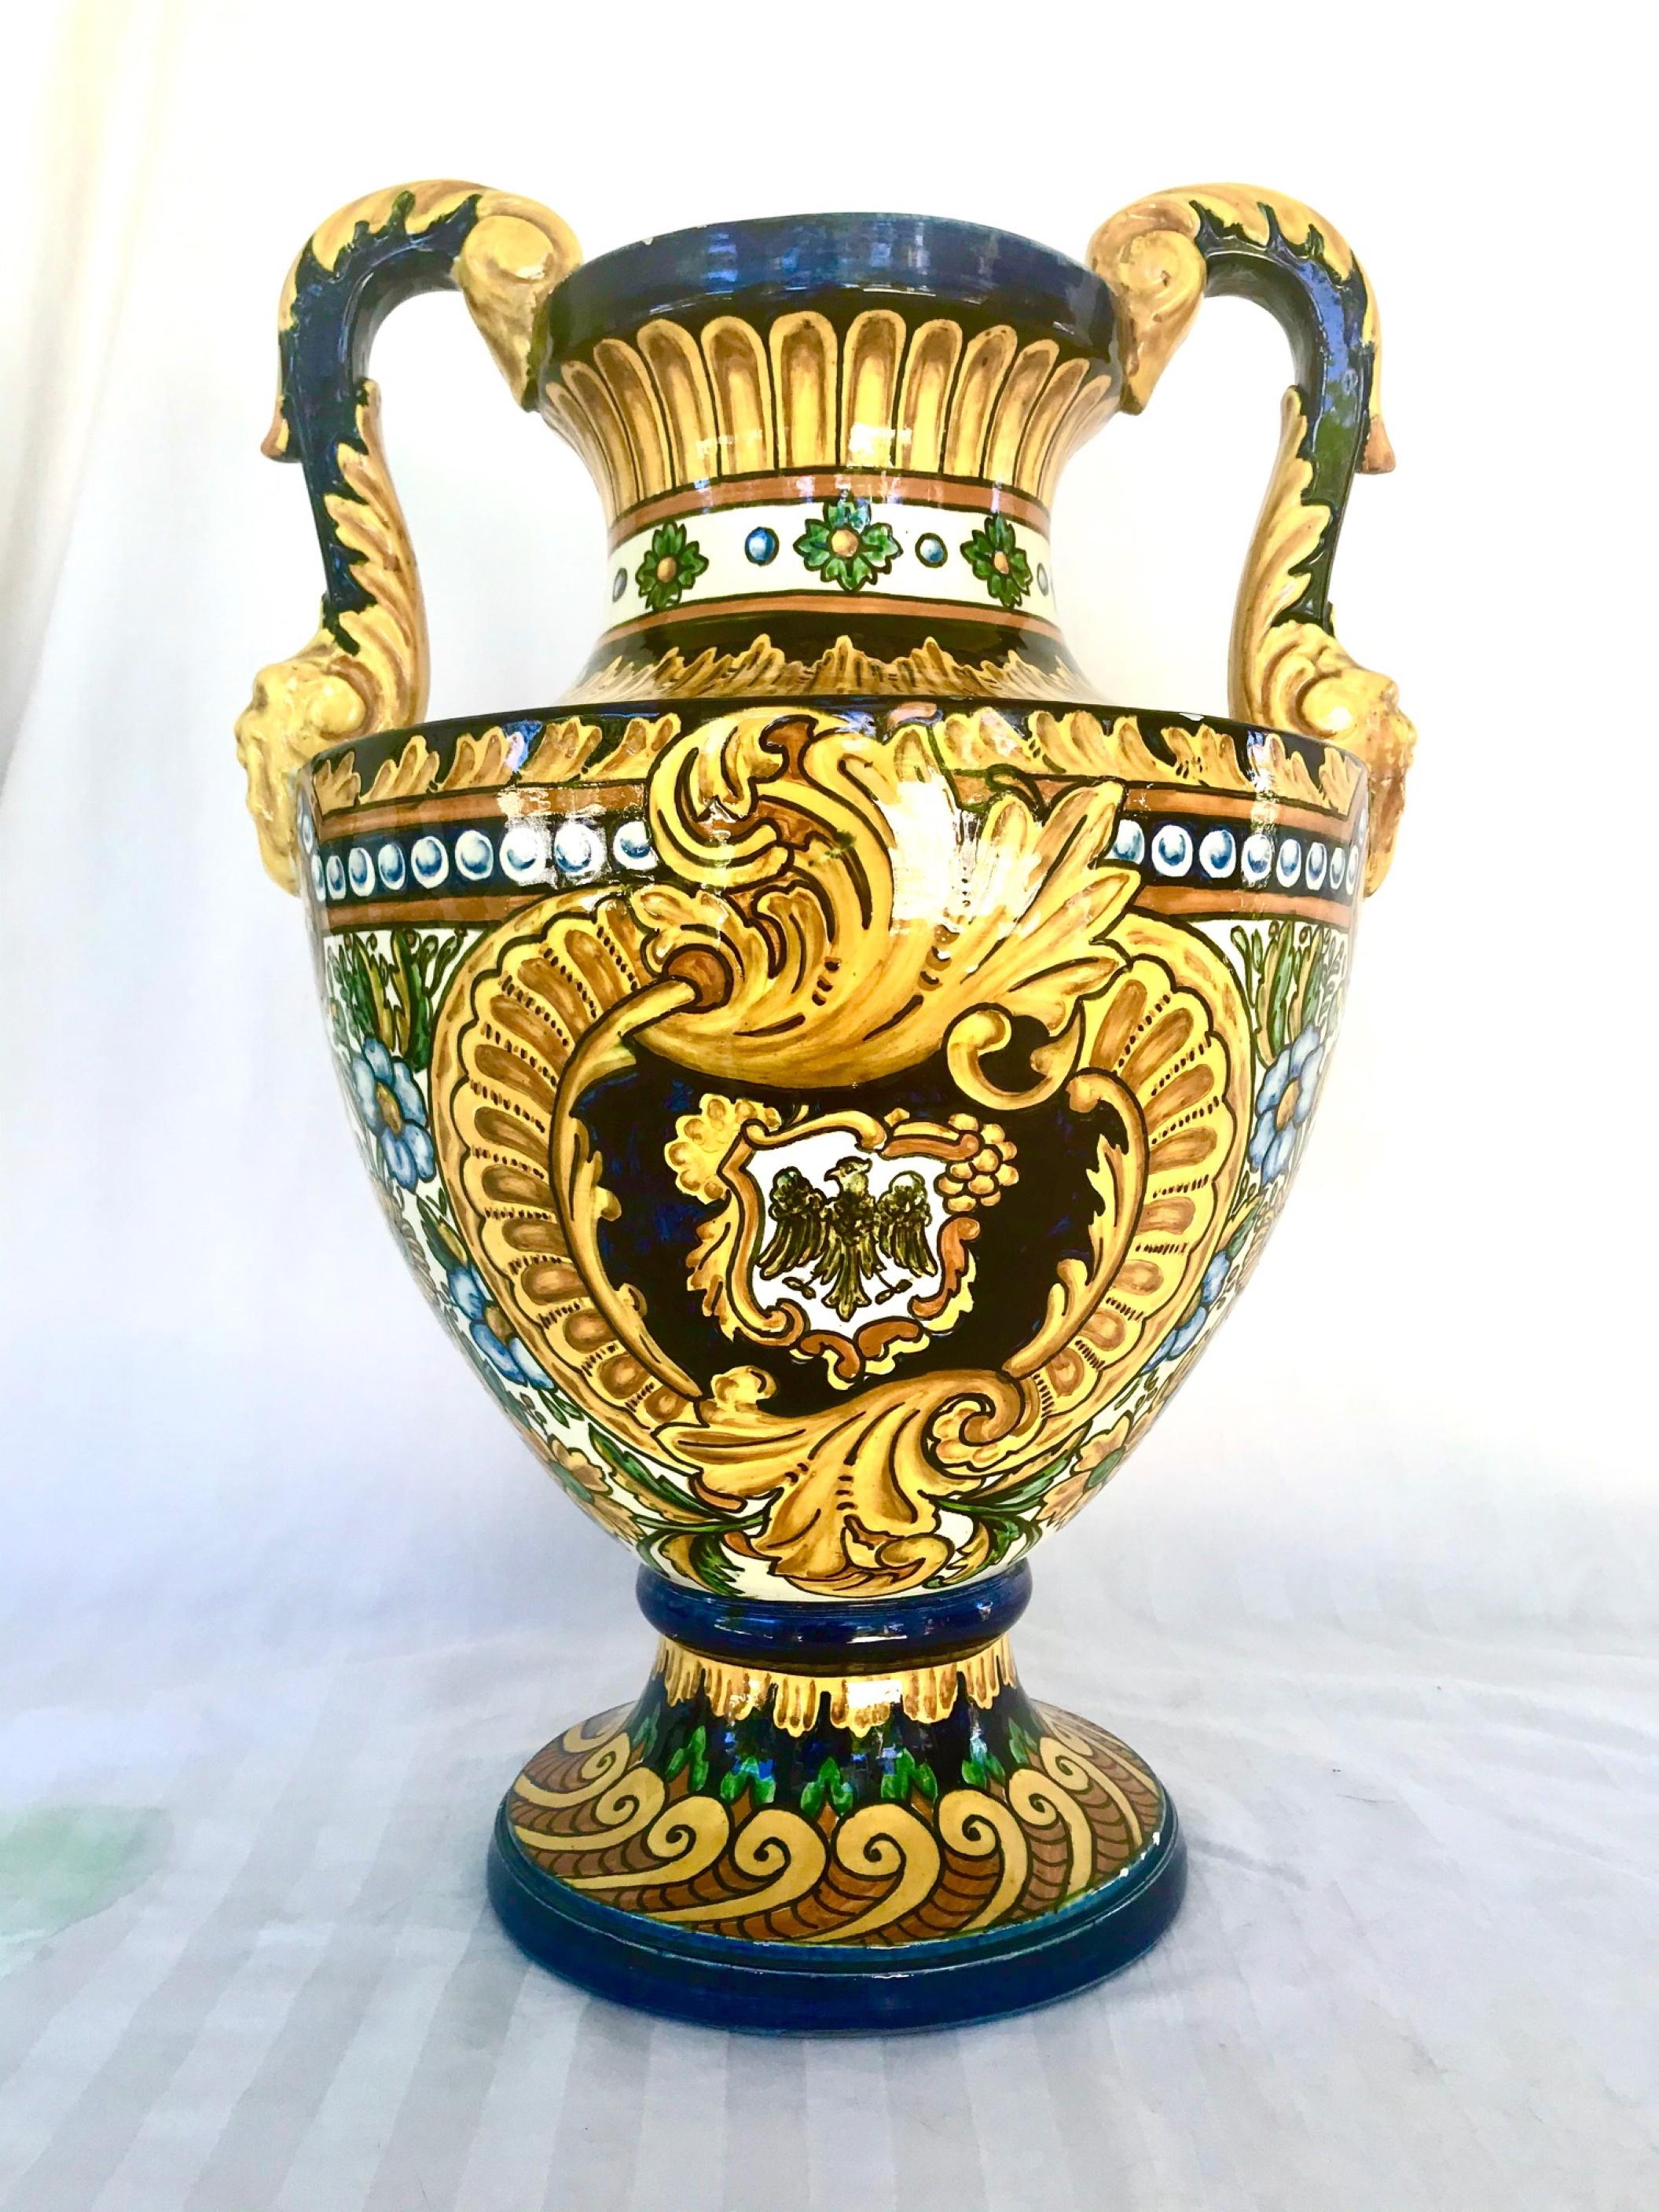 Large vintage Mediterranean Majolica two handled urn.

This fabulous vintage bulbous urn is hand decorated with yellow Renaissance Medici style motifs against a dark blue background. Two C-scroll handles are ornate with hand painted acanthus leaf